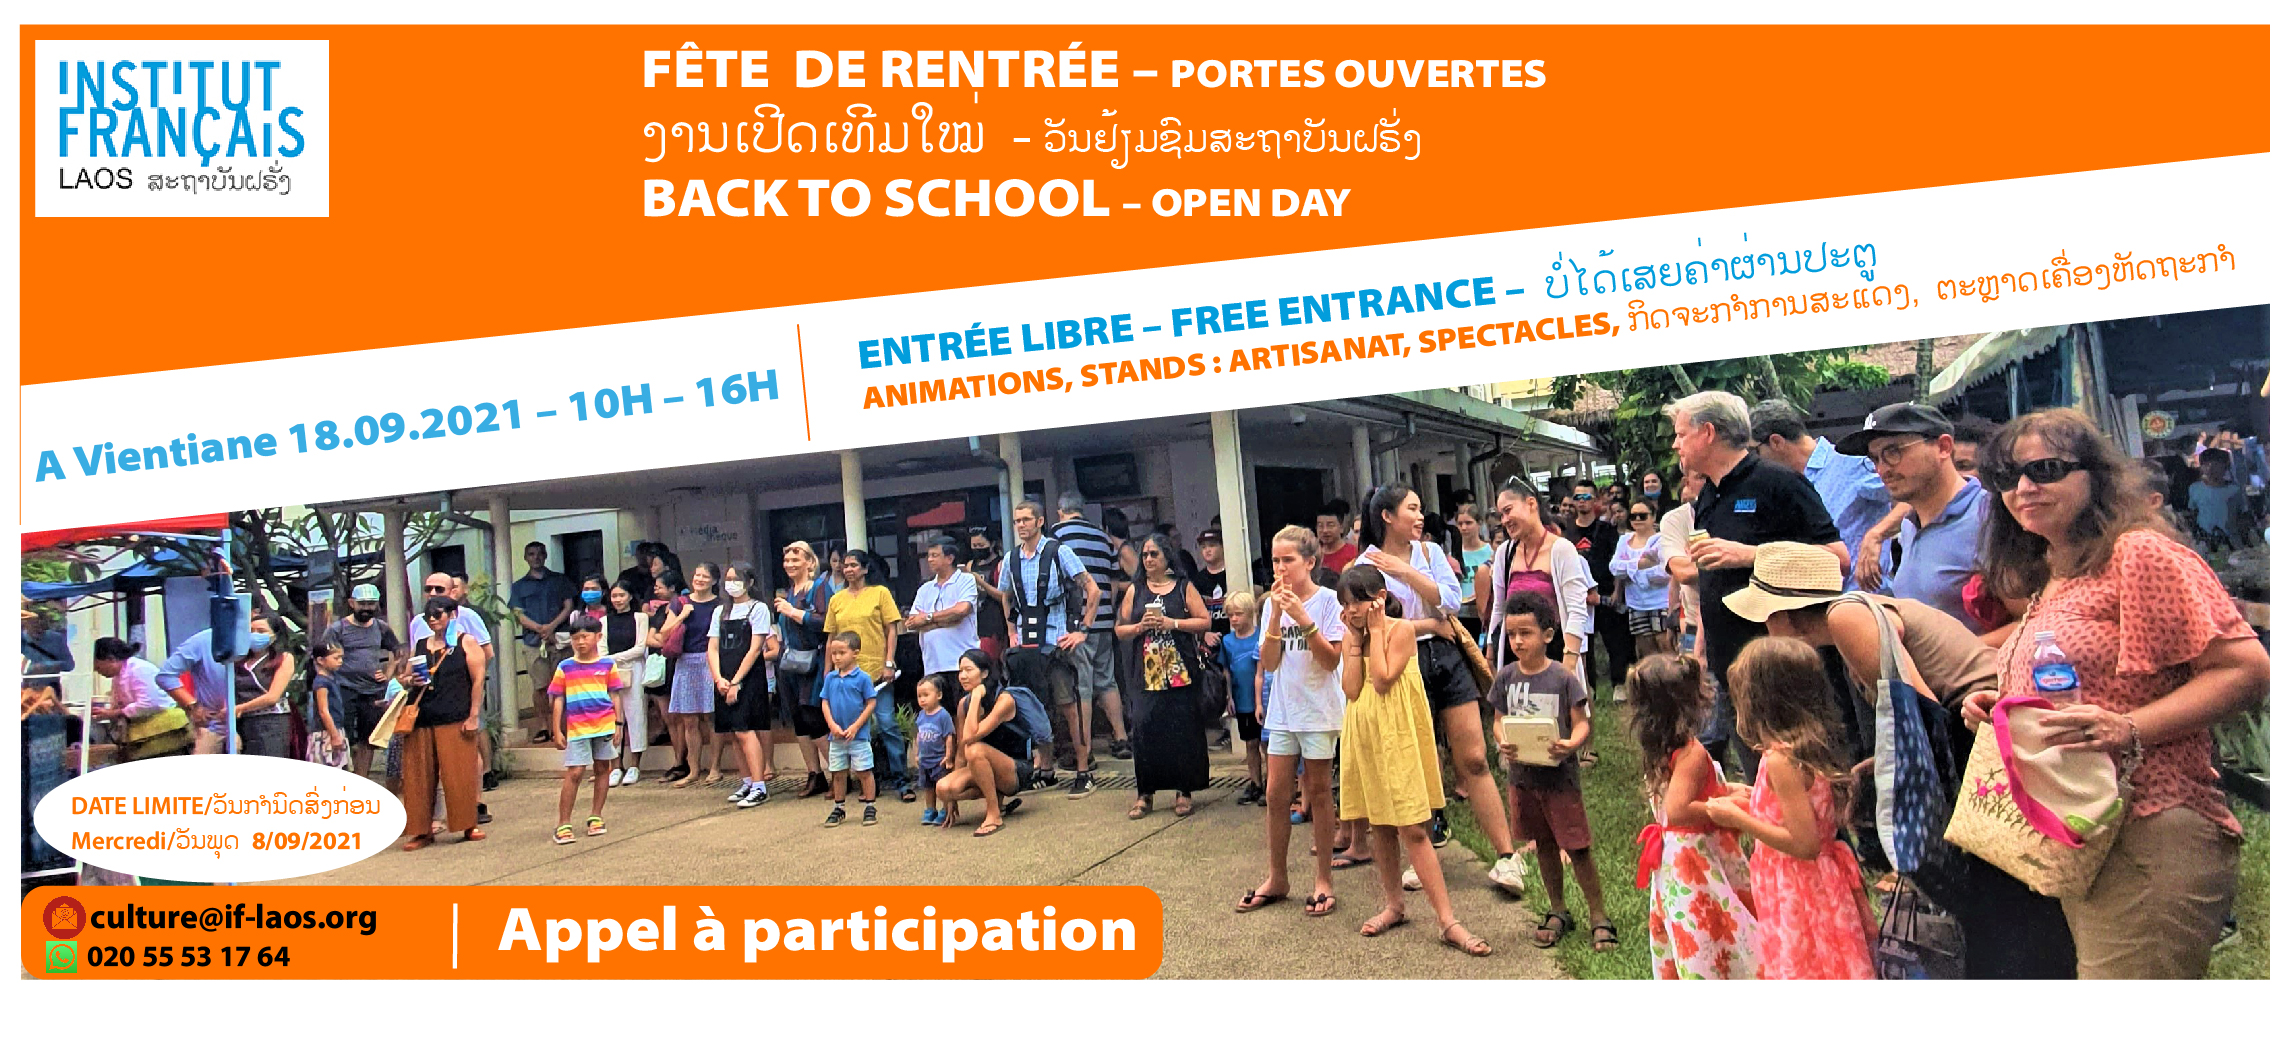 IFL BACK TO SCHOOL DAY/ OPEN DAY